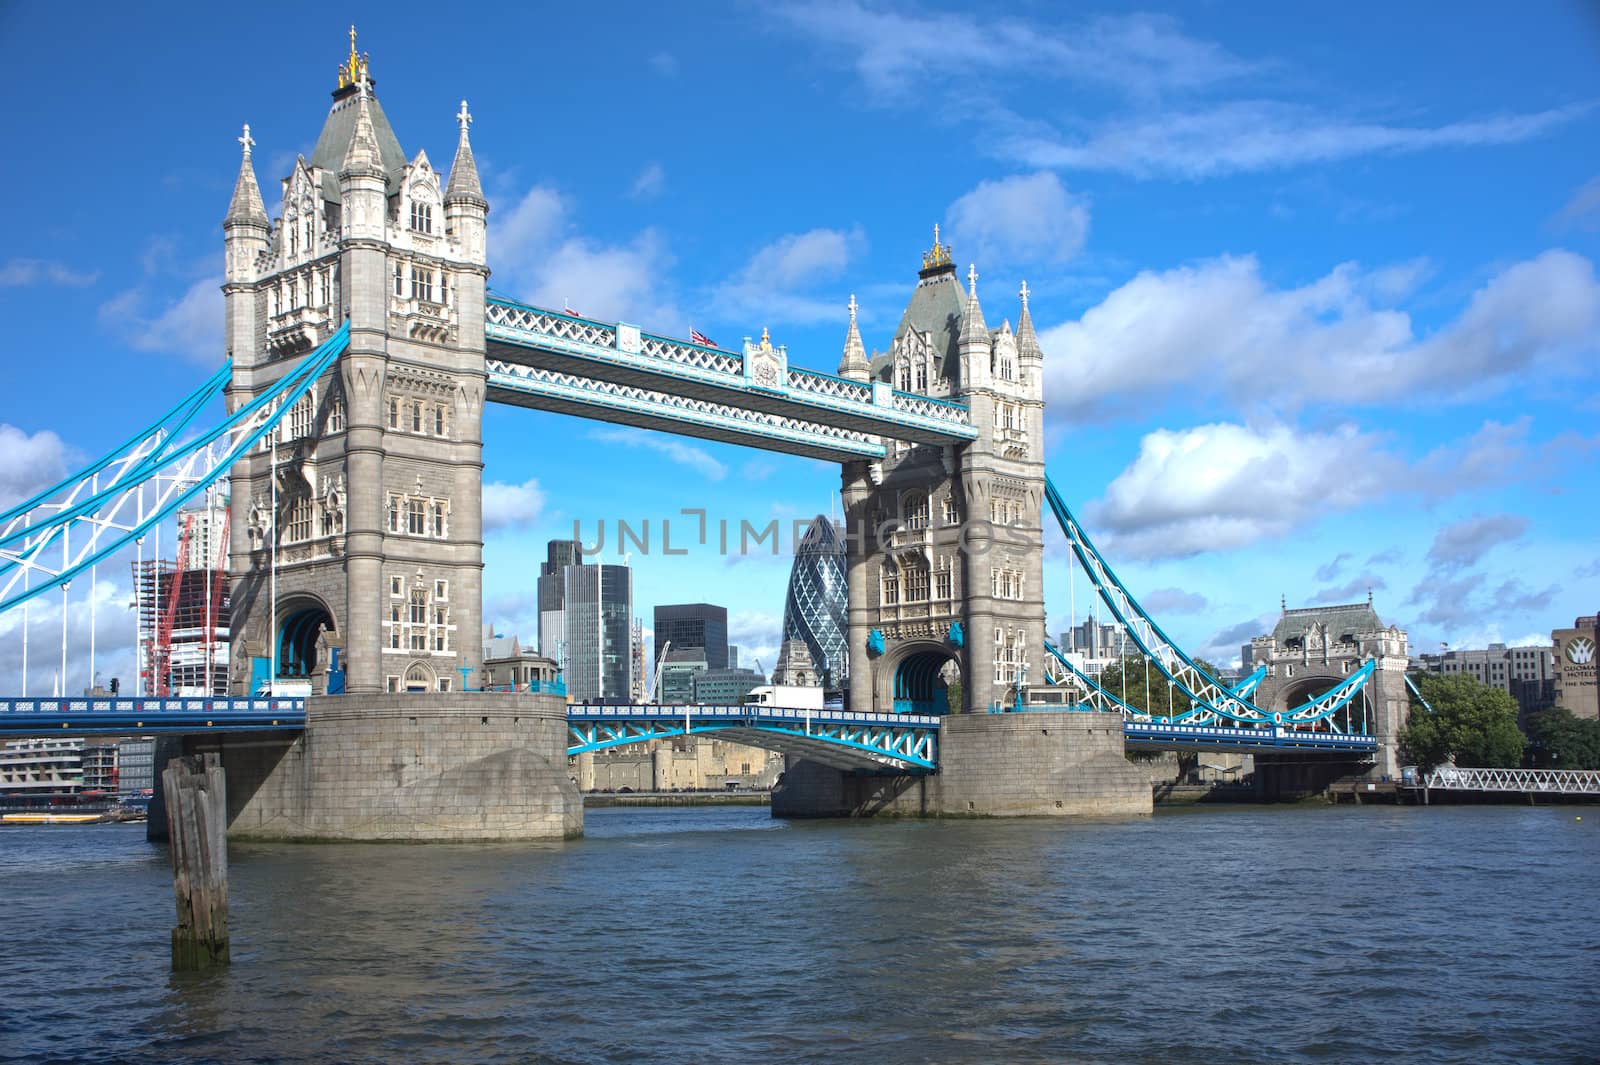 LONDON - SEPTEMBER 25.  Tower Bridge, one of the most iconic bridges over the River Thames, on September 25, 2012 in London, United Kingdom.